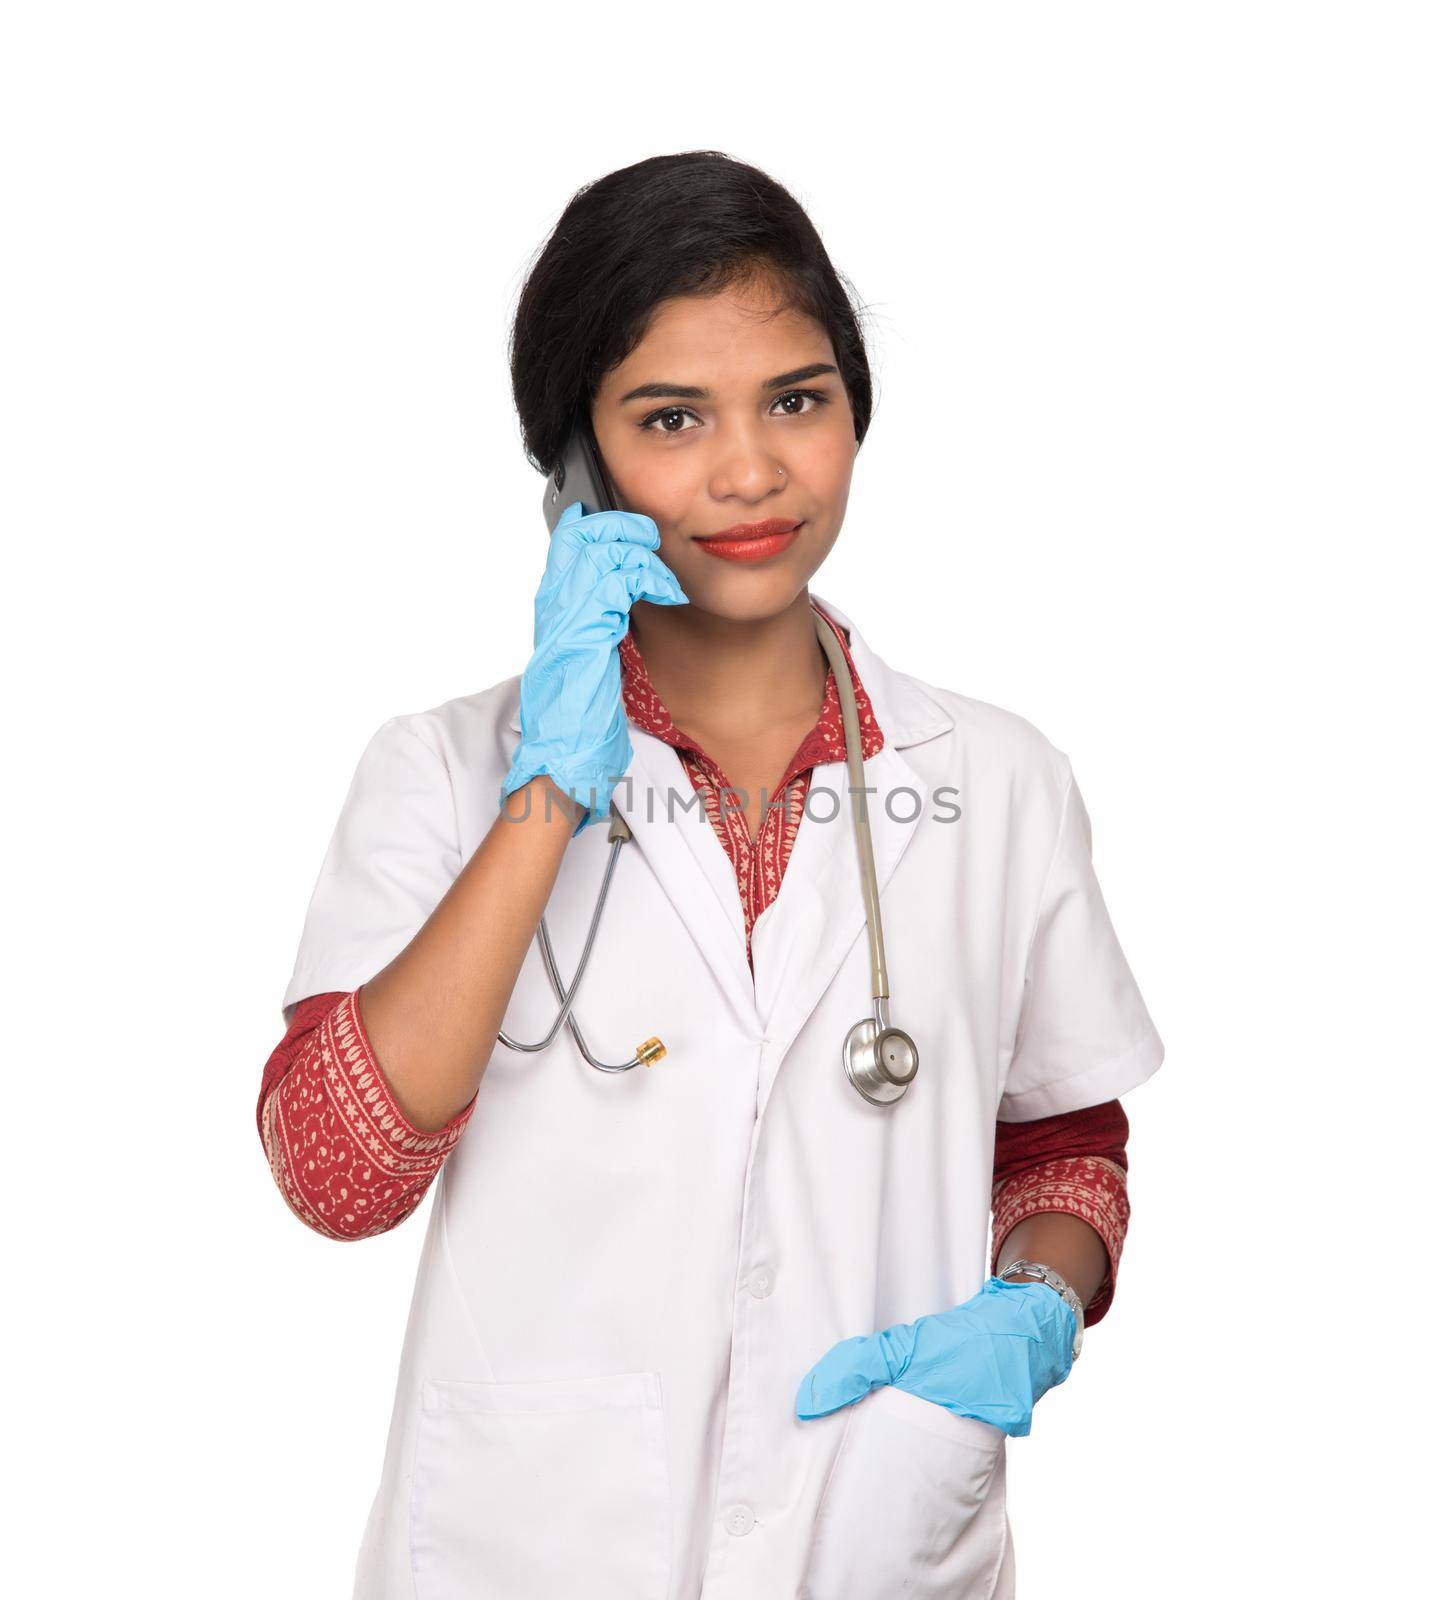 Female doctor with stethoscope talking on mobile phone on white background by DipakShelare